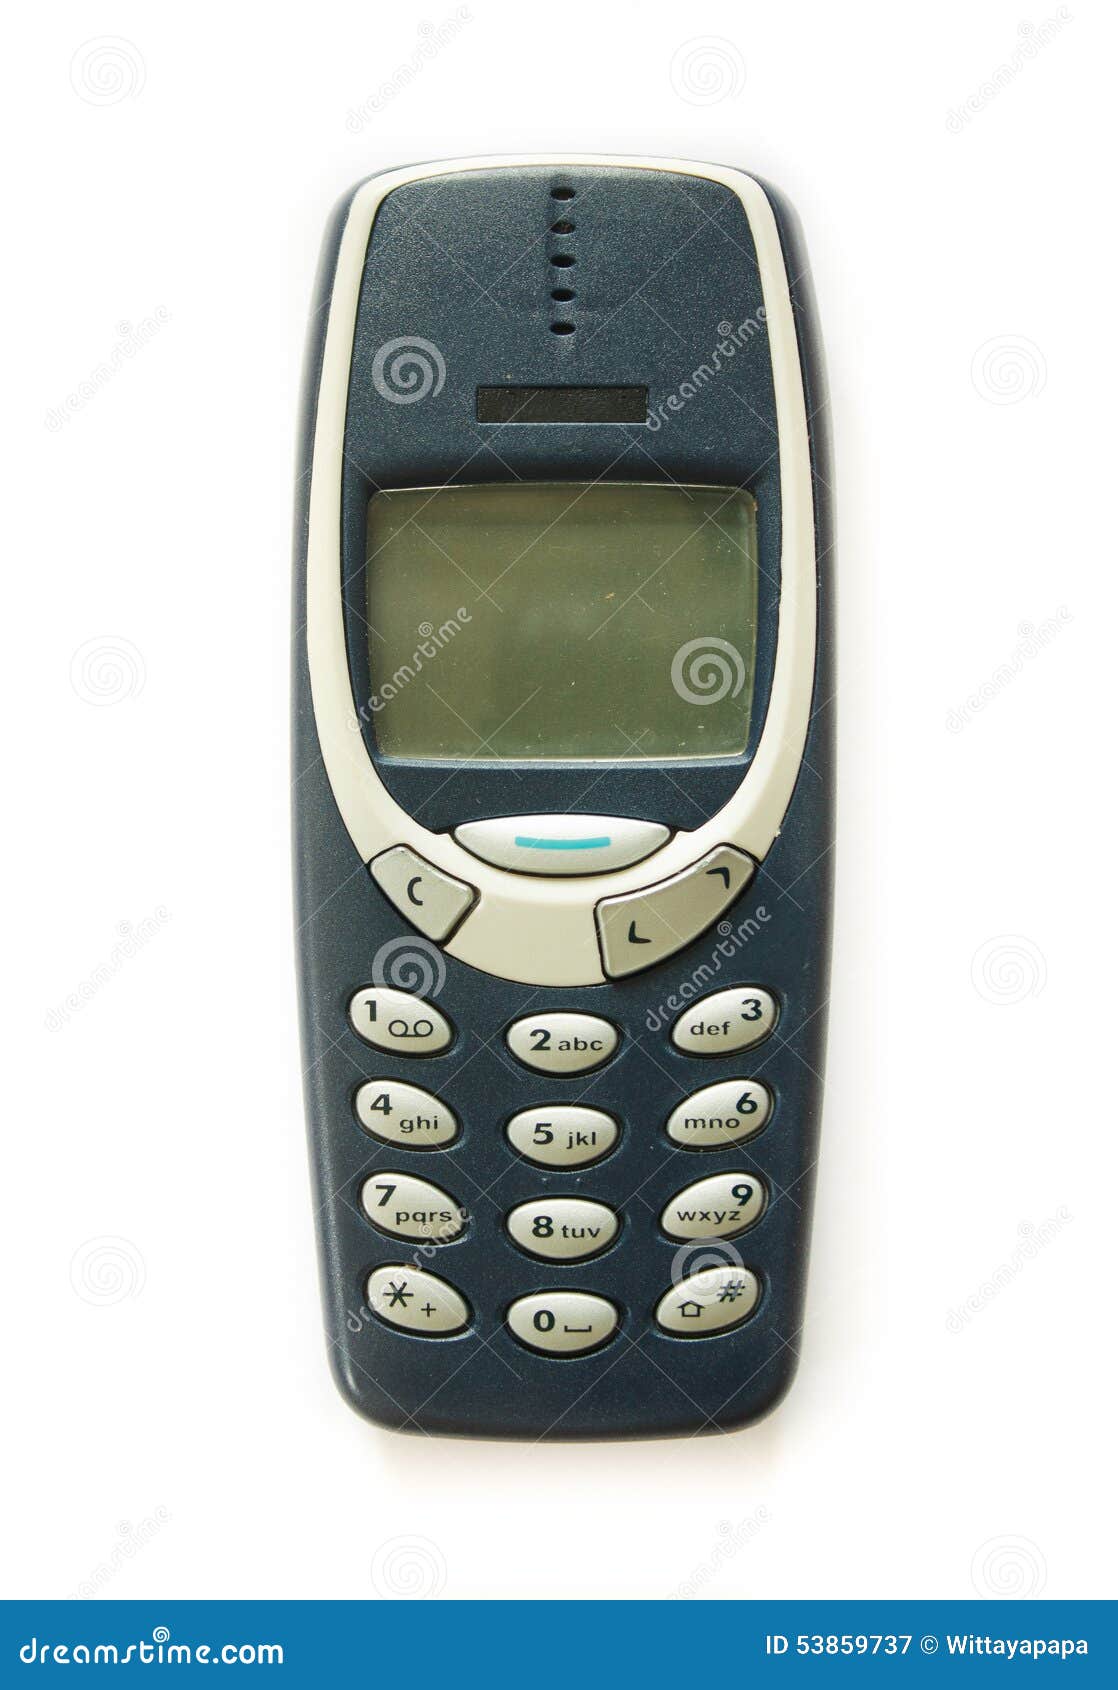 Download Opera For Mobile Nokia 3310